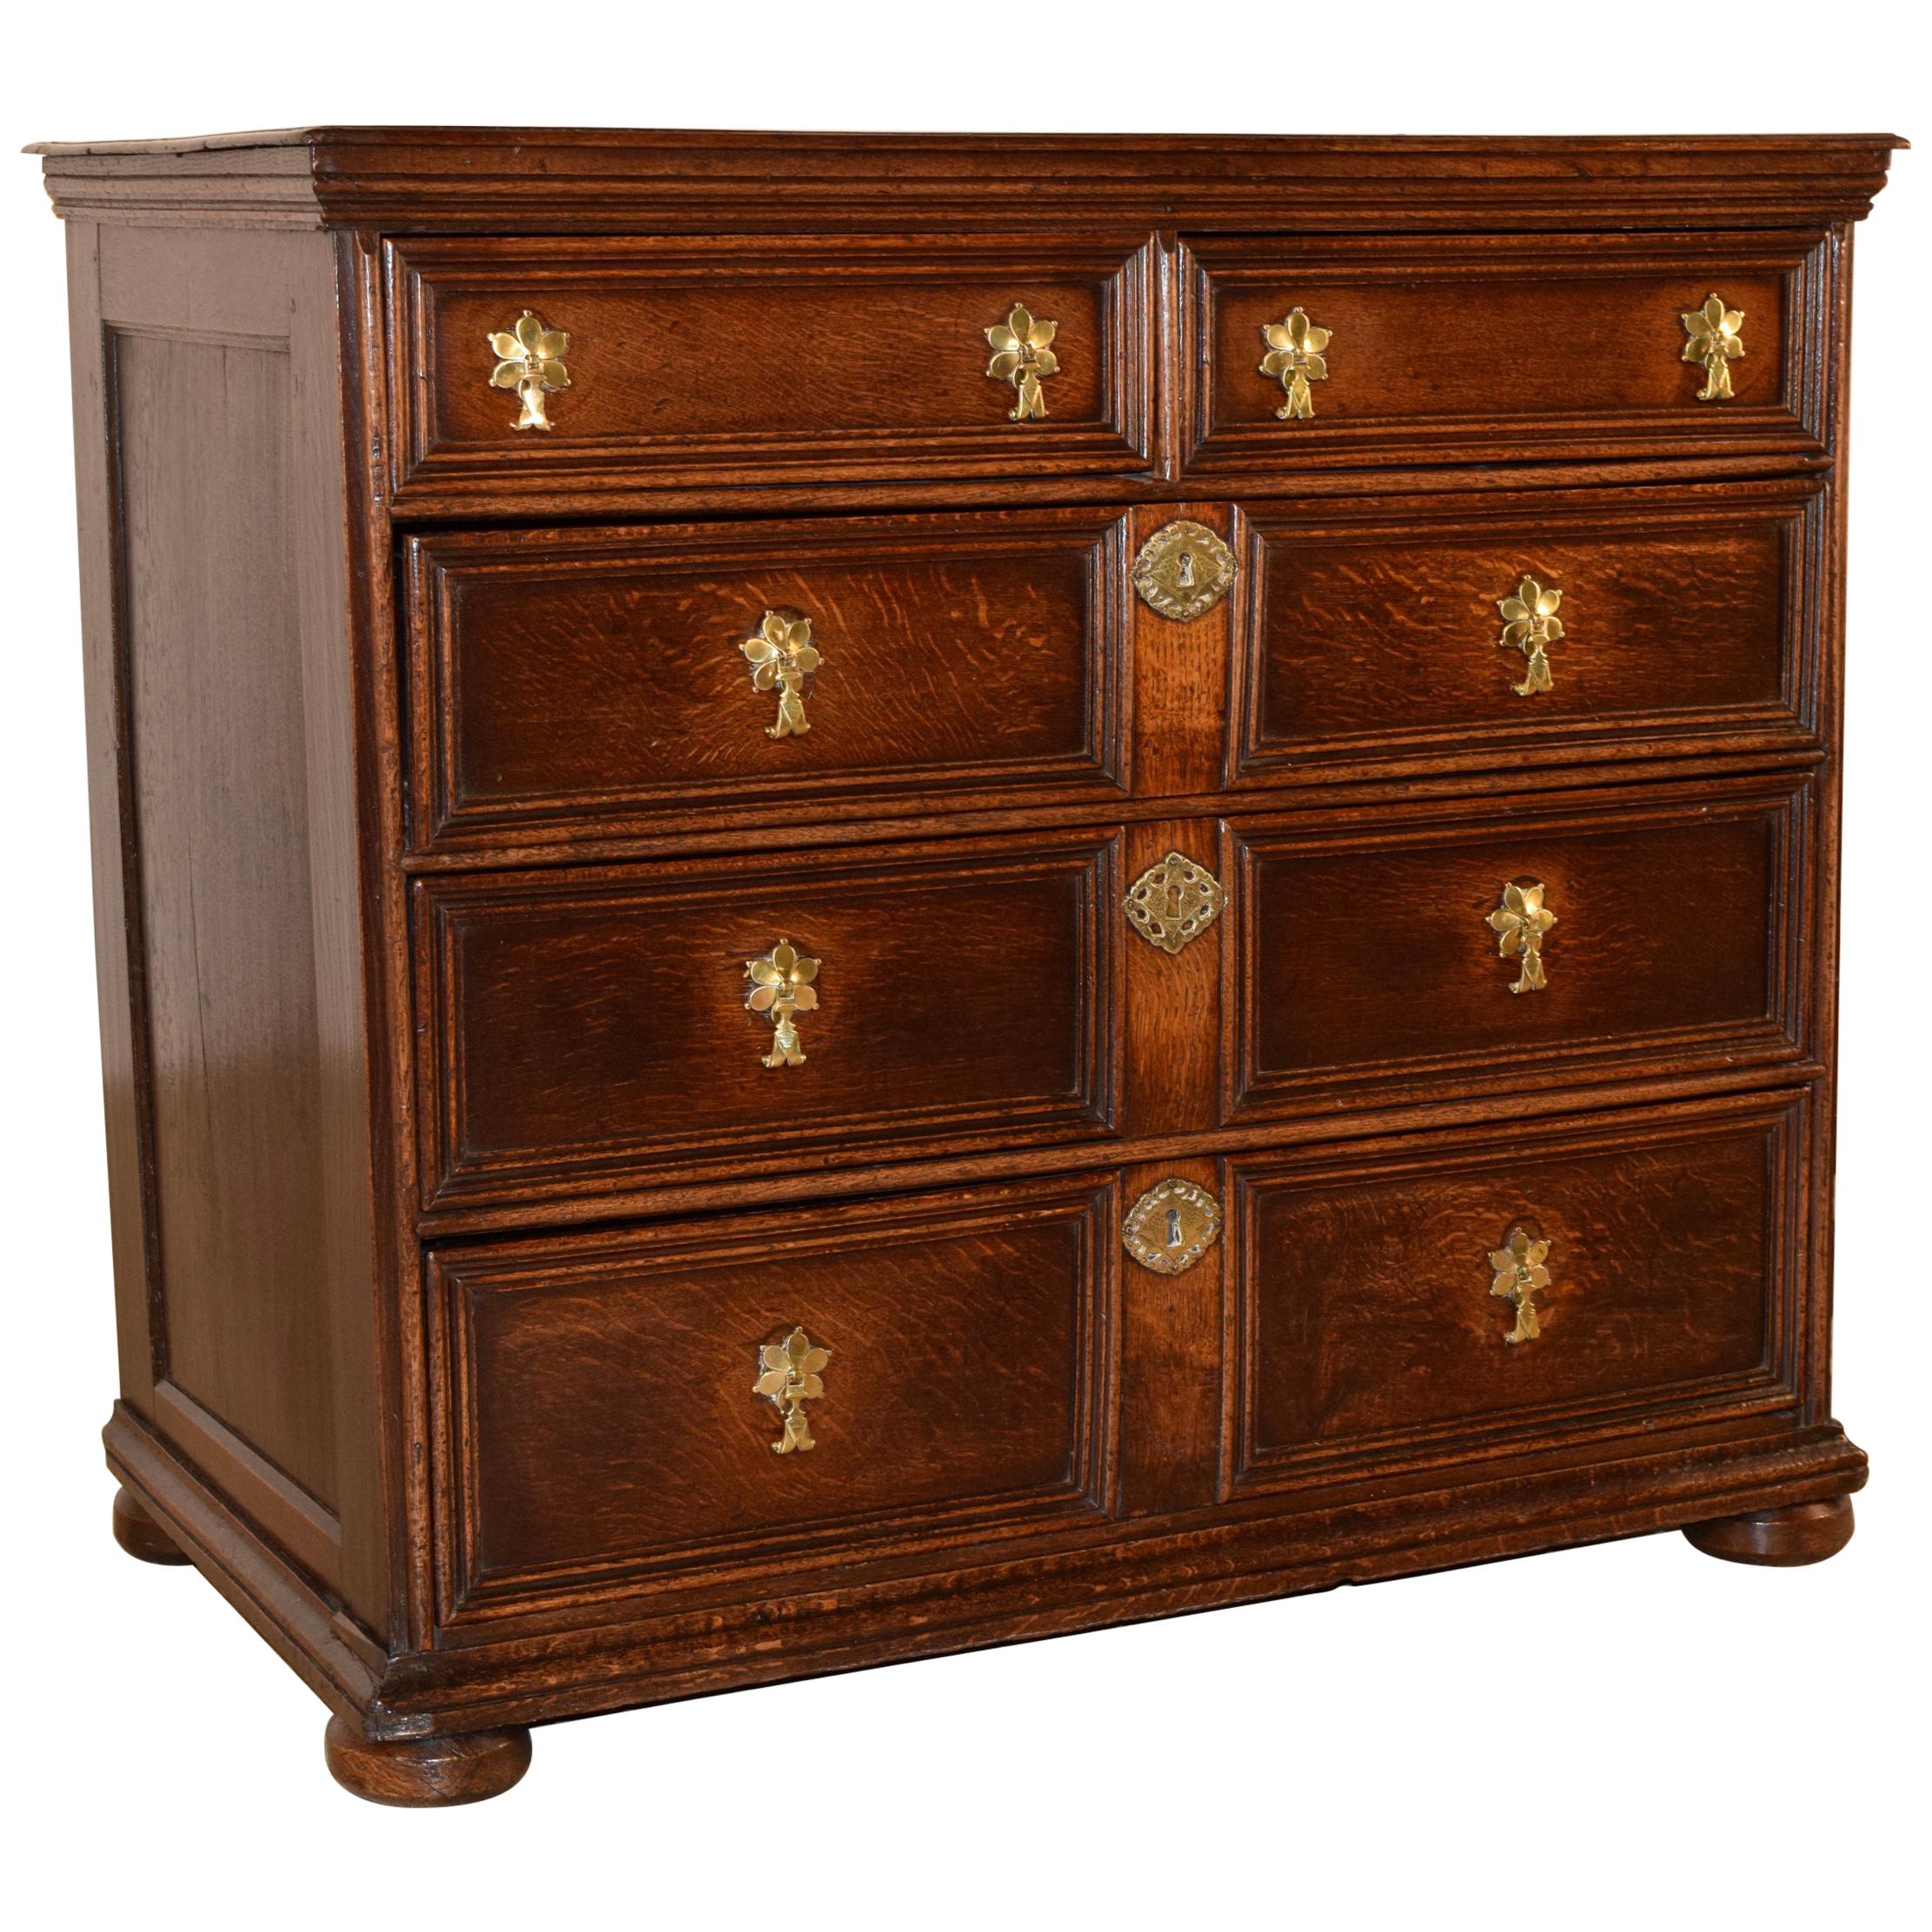 18th Century Paneled Chest of Drawers